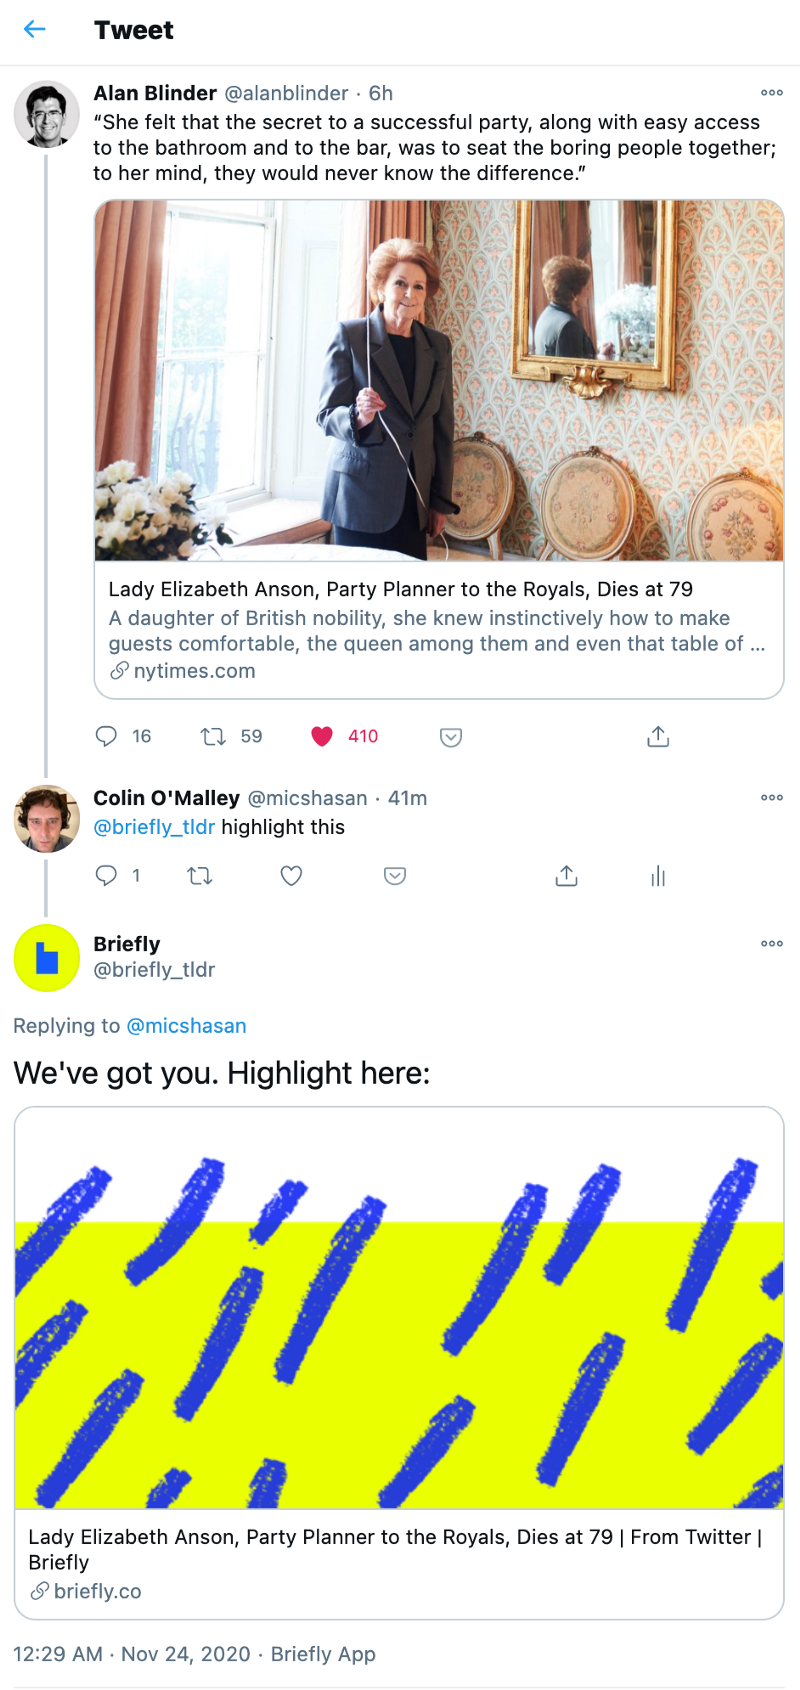 At reply for highlights from within Twitter